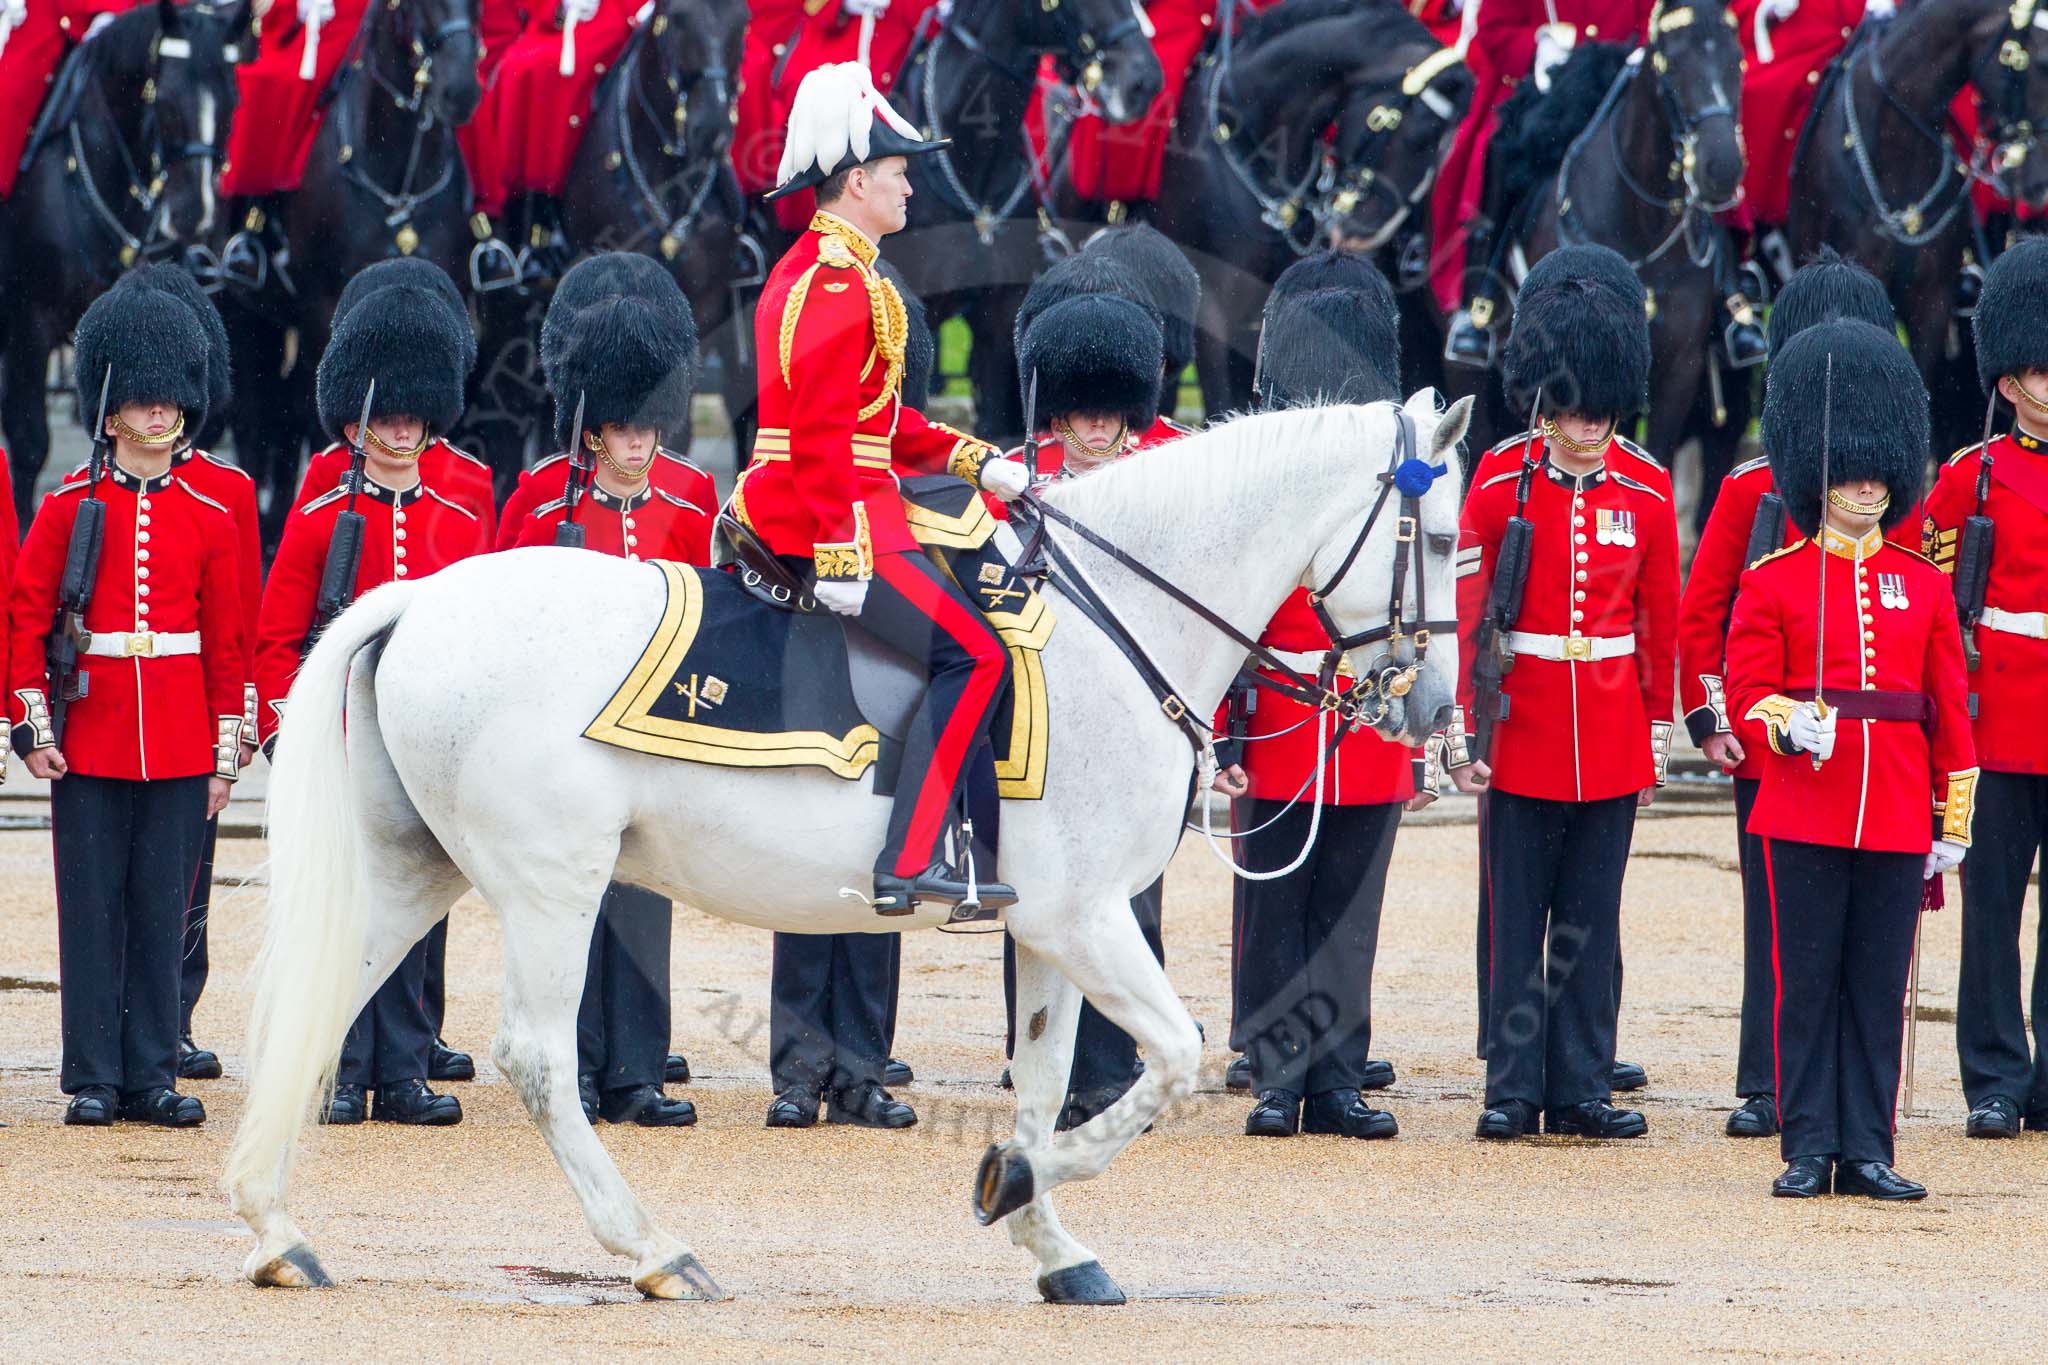 The Colonel's Review 2014.
Horse Guards Parade, Westminster,
London,

United Kingdom,
on 07 June 2014 at 11:02, image #293